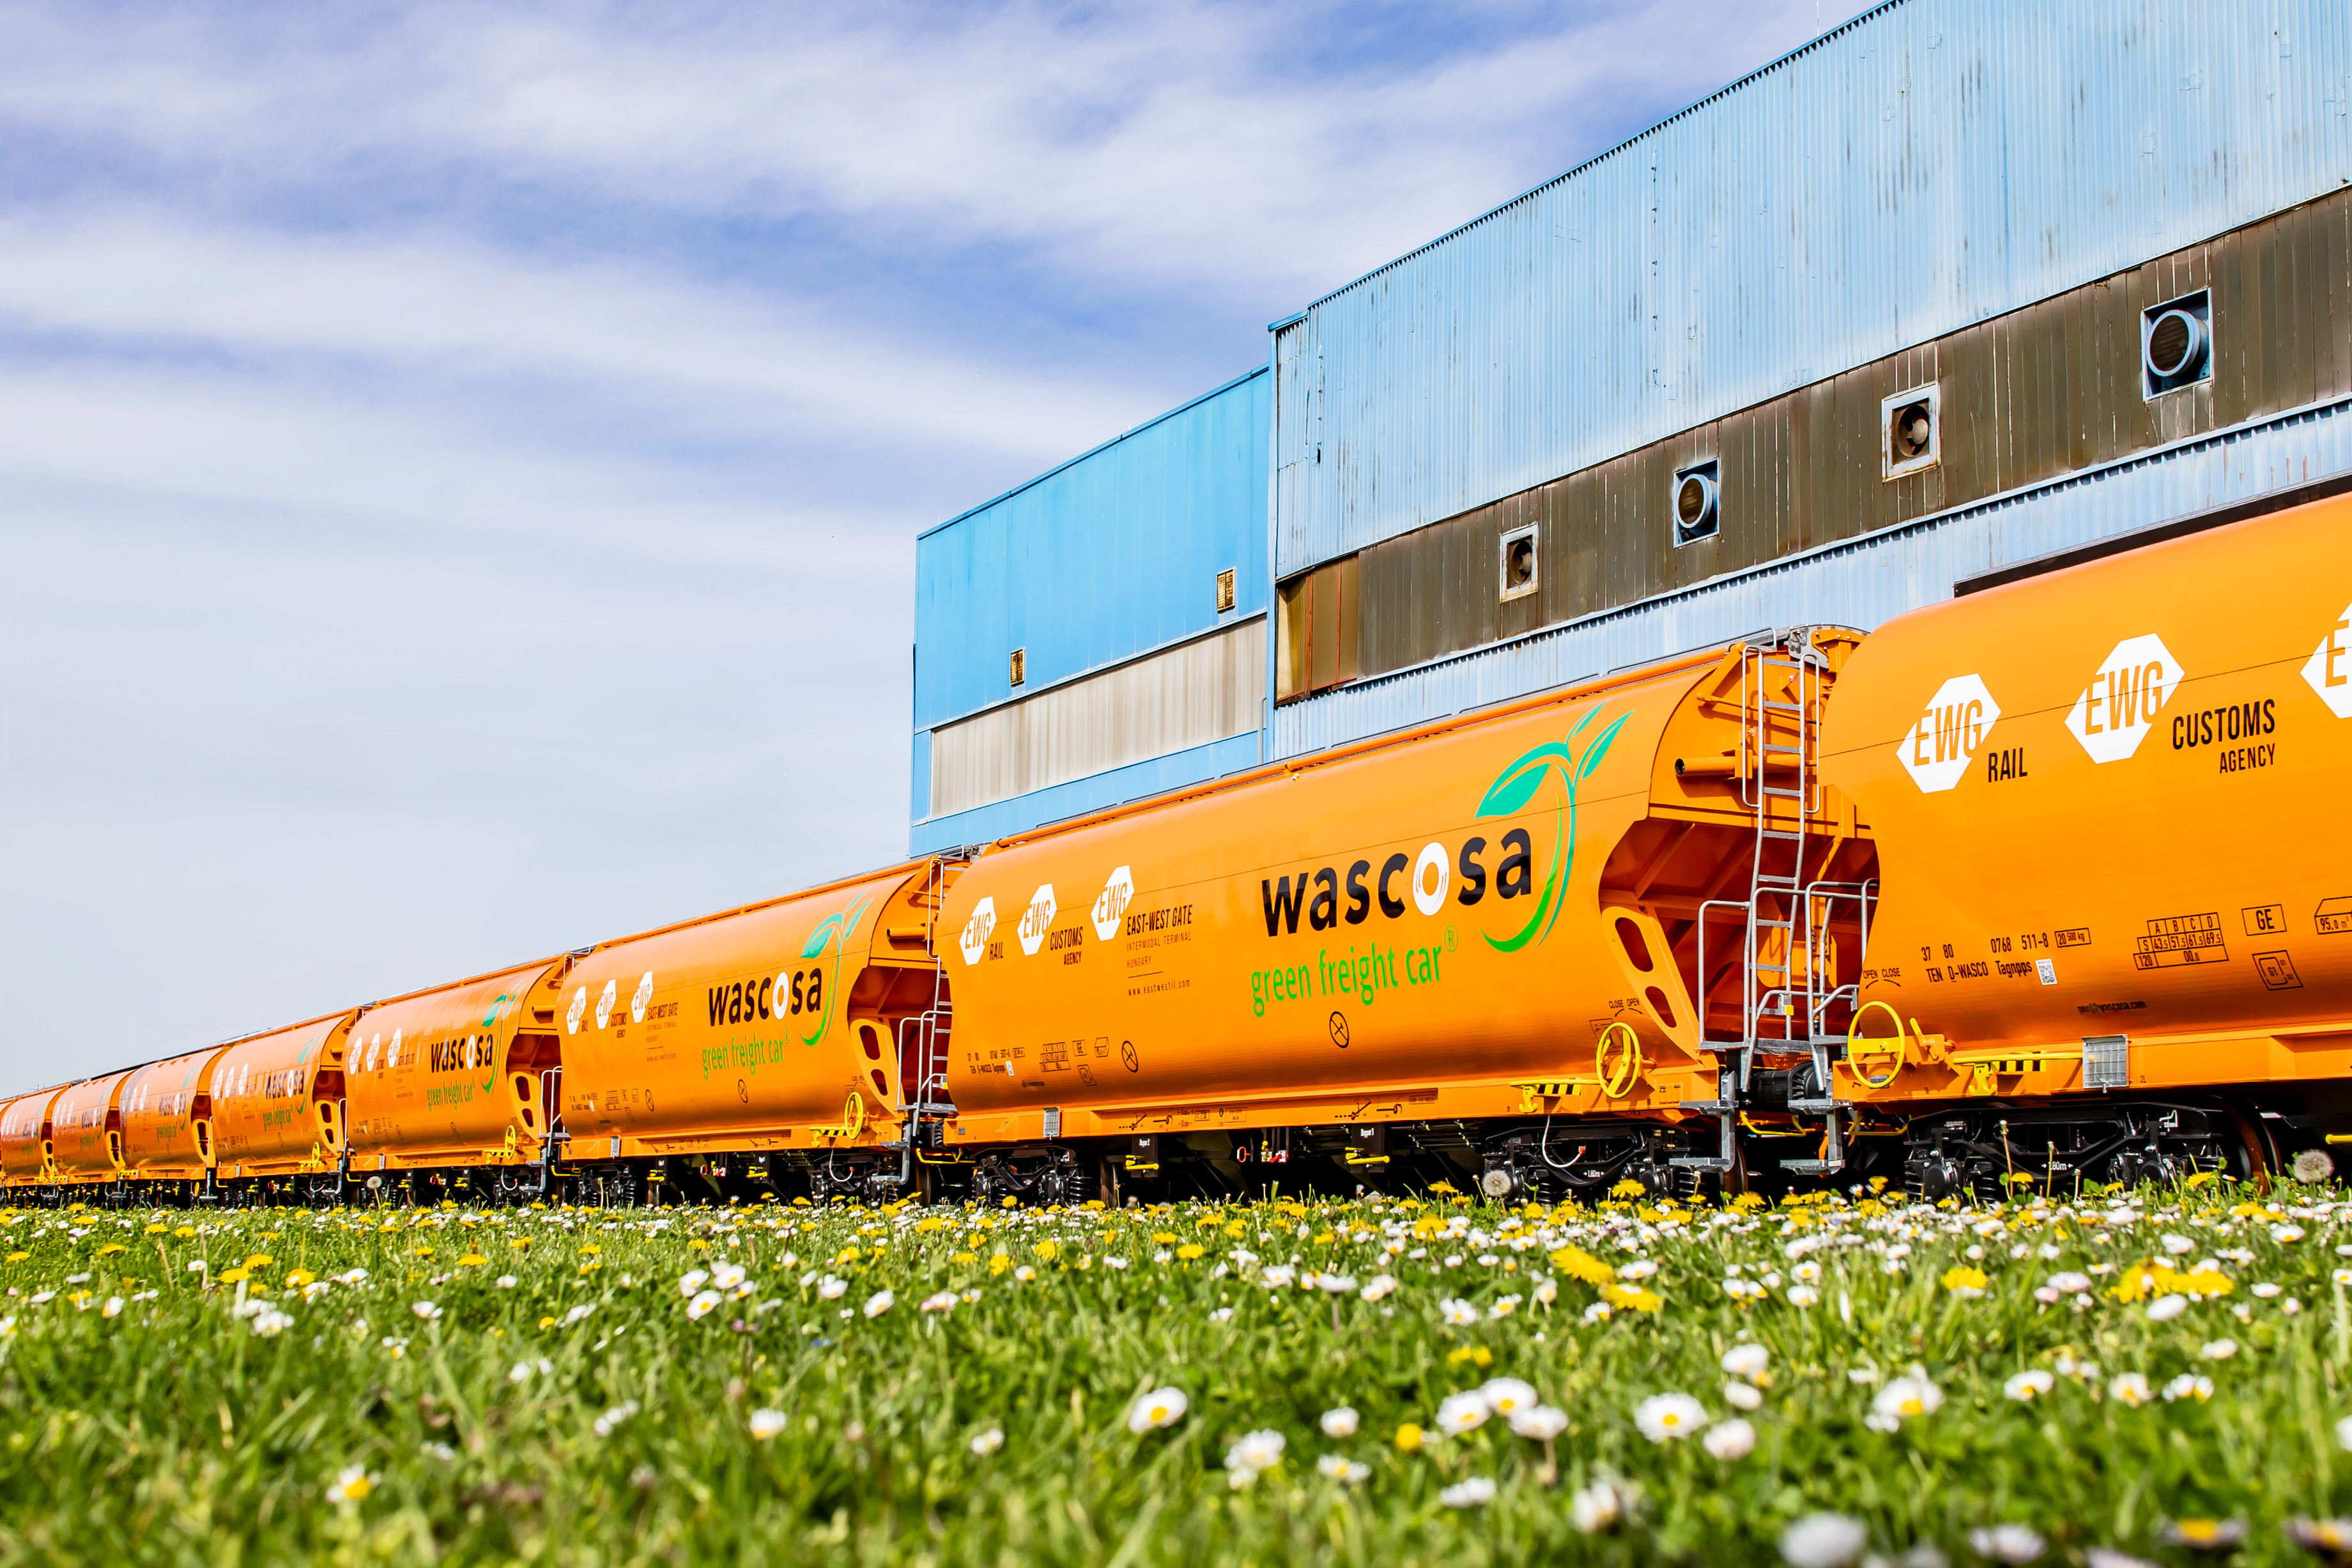 Wascosa launches its green freight car®